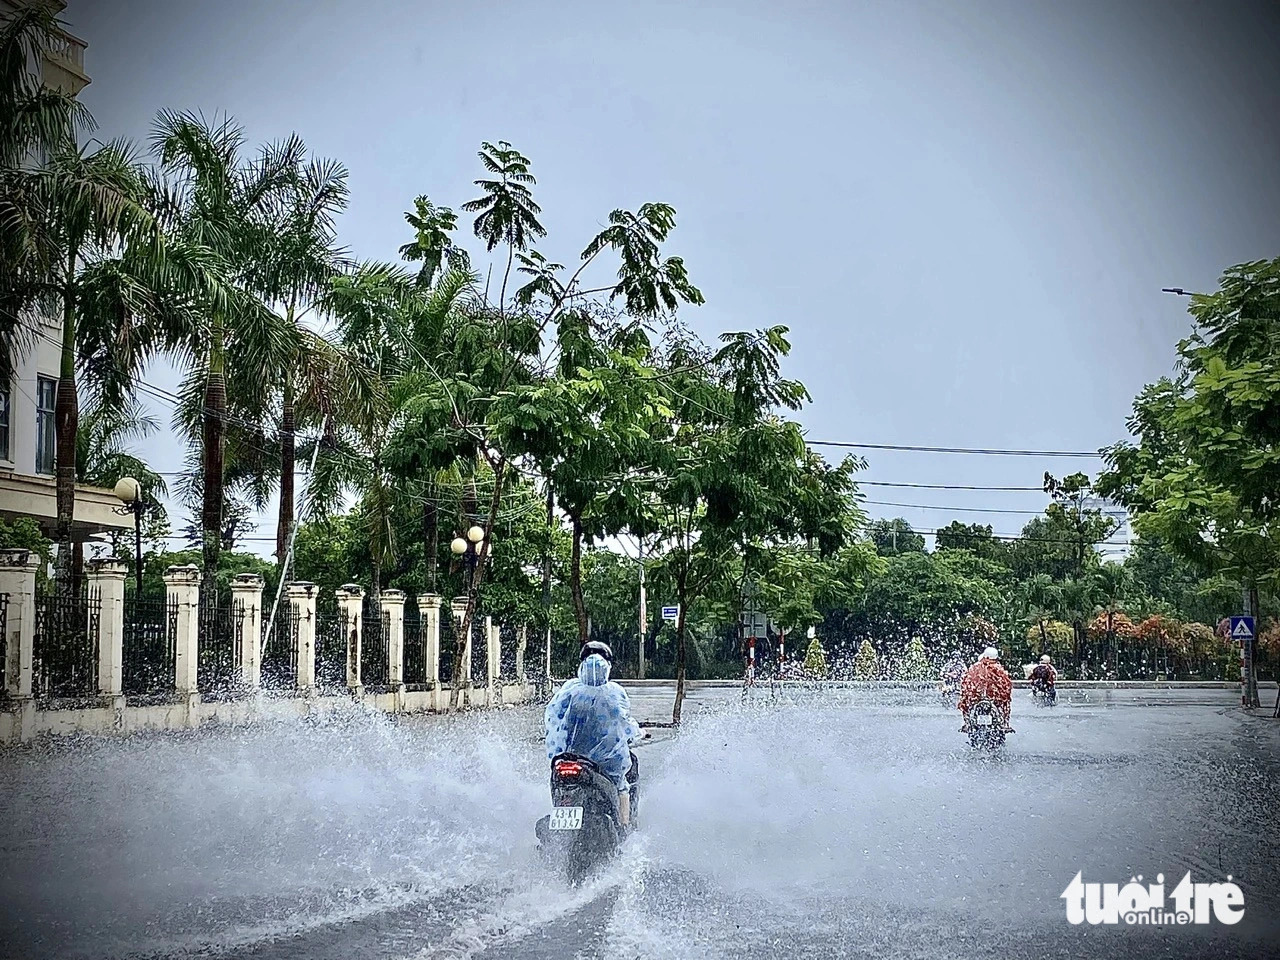 Commuters travel on a waterlogged street in Cam Le District, Da Nang City, central Vietnam. Photo: Truong Trung / Tuoi Tre